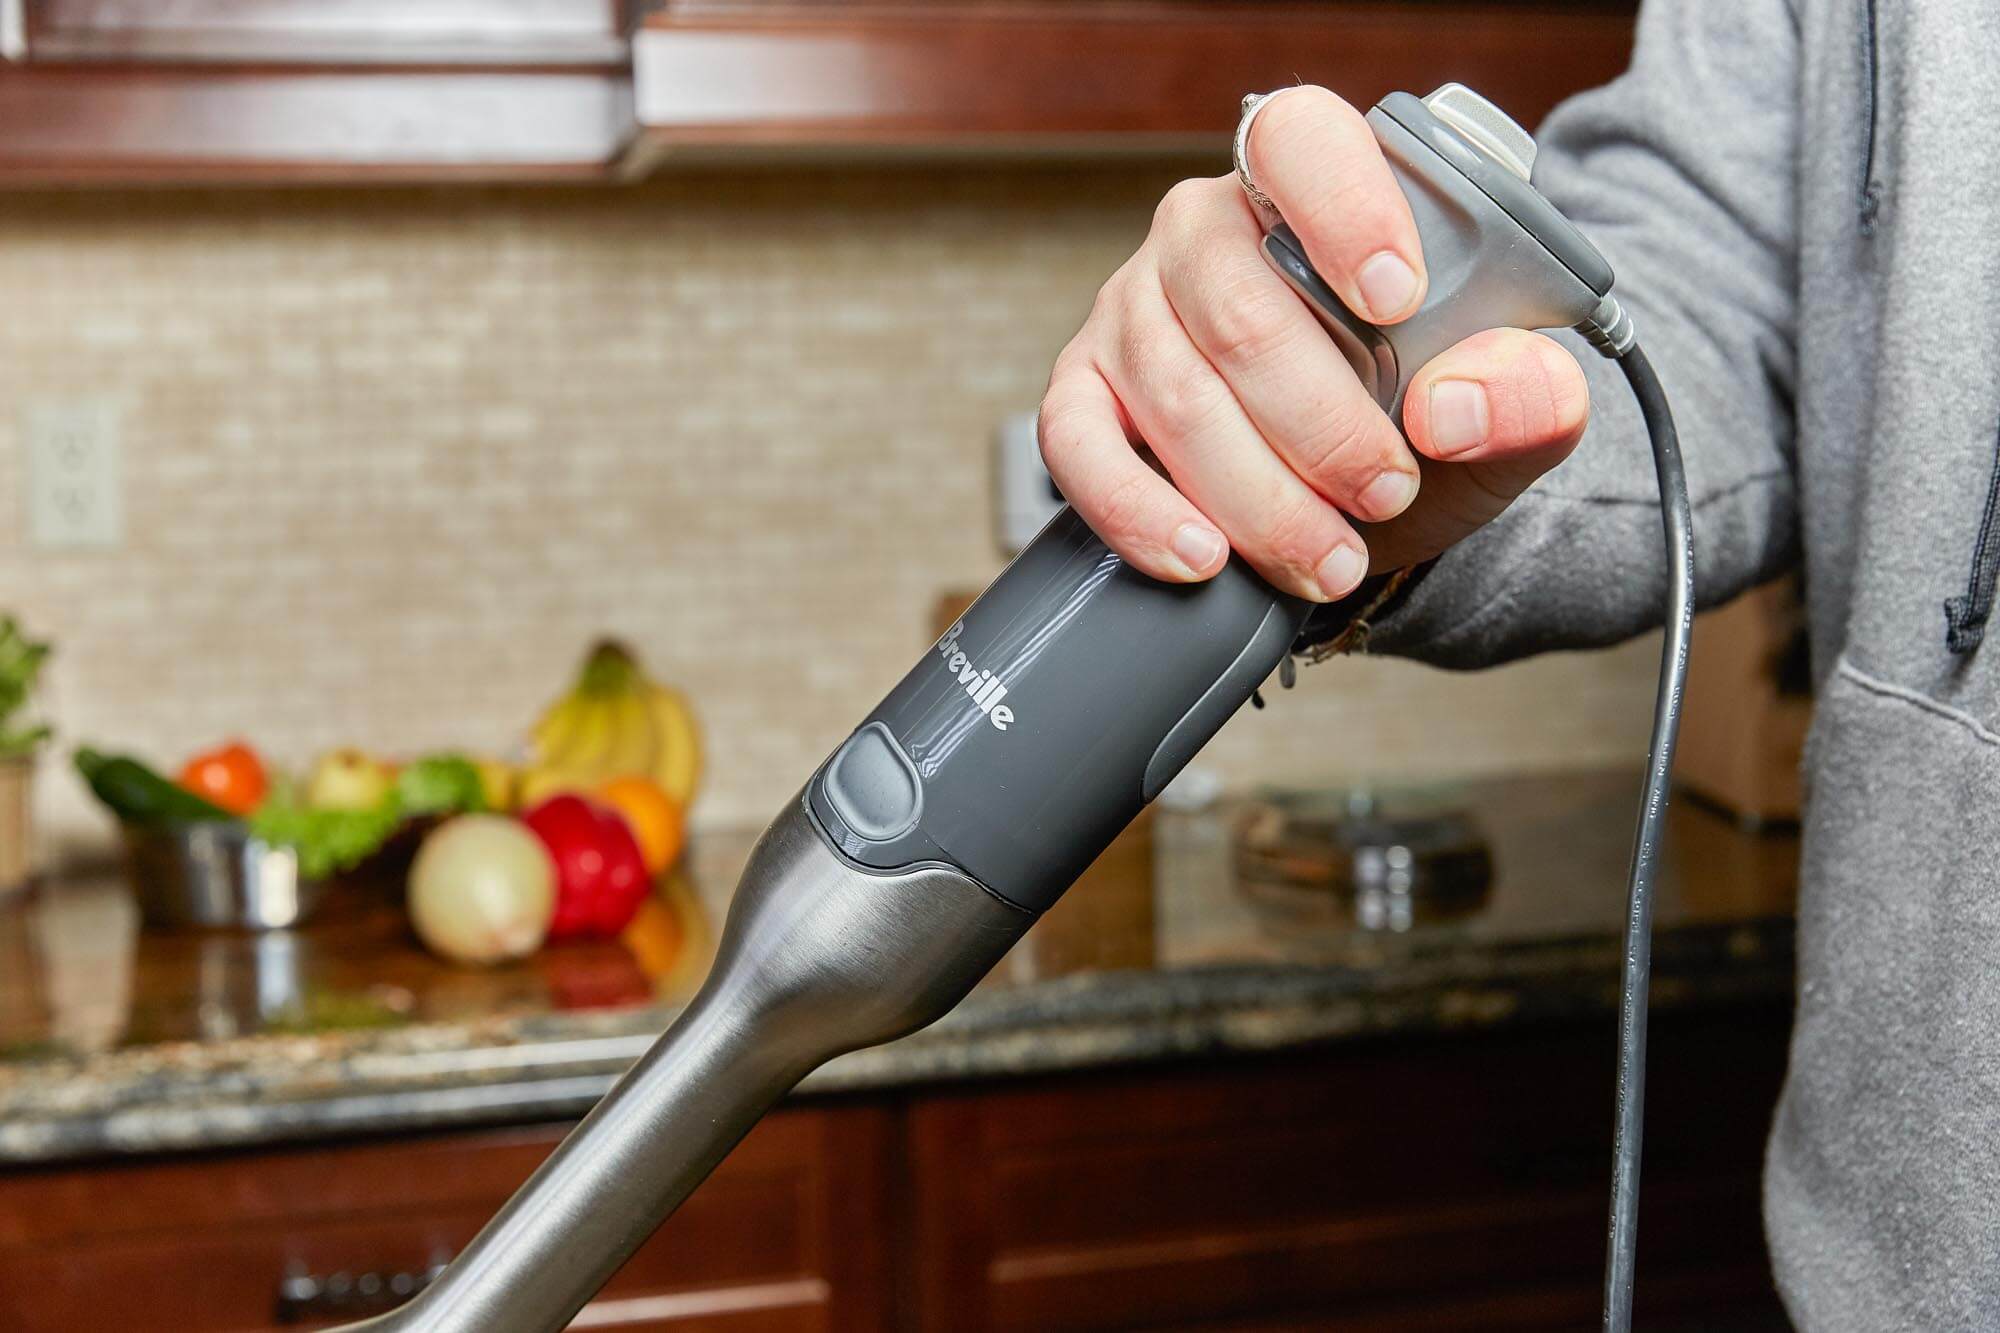 The Breville BSB510XL Control Grip Immersion Blender In-depth Review